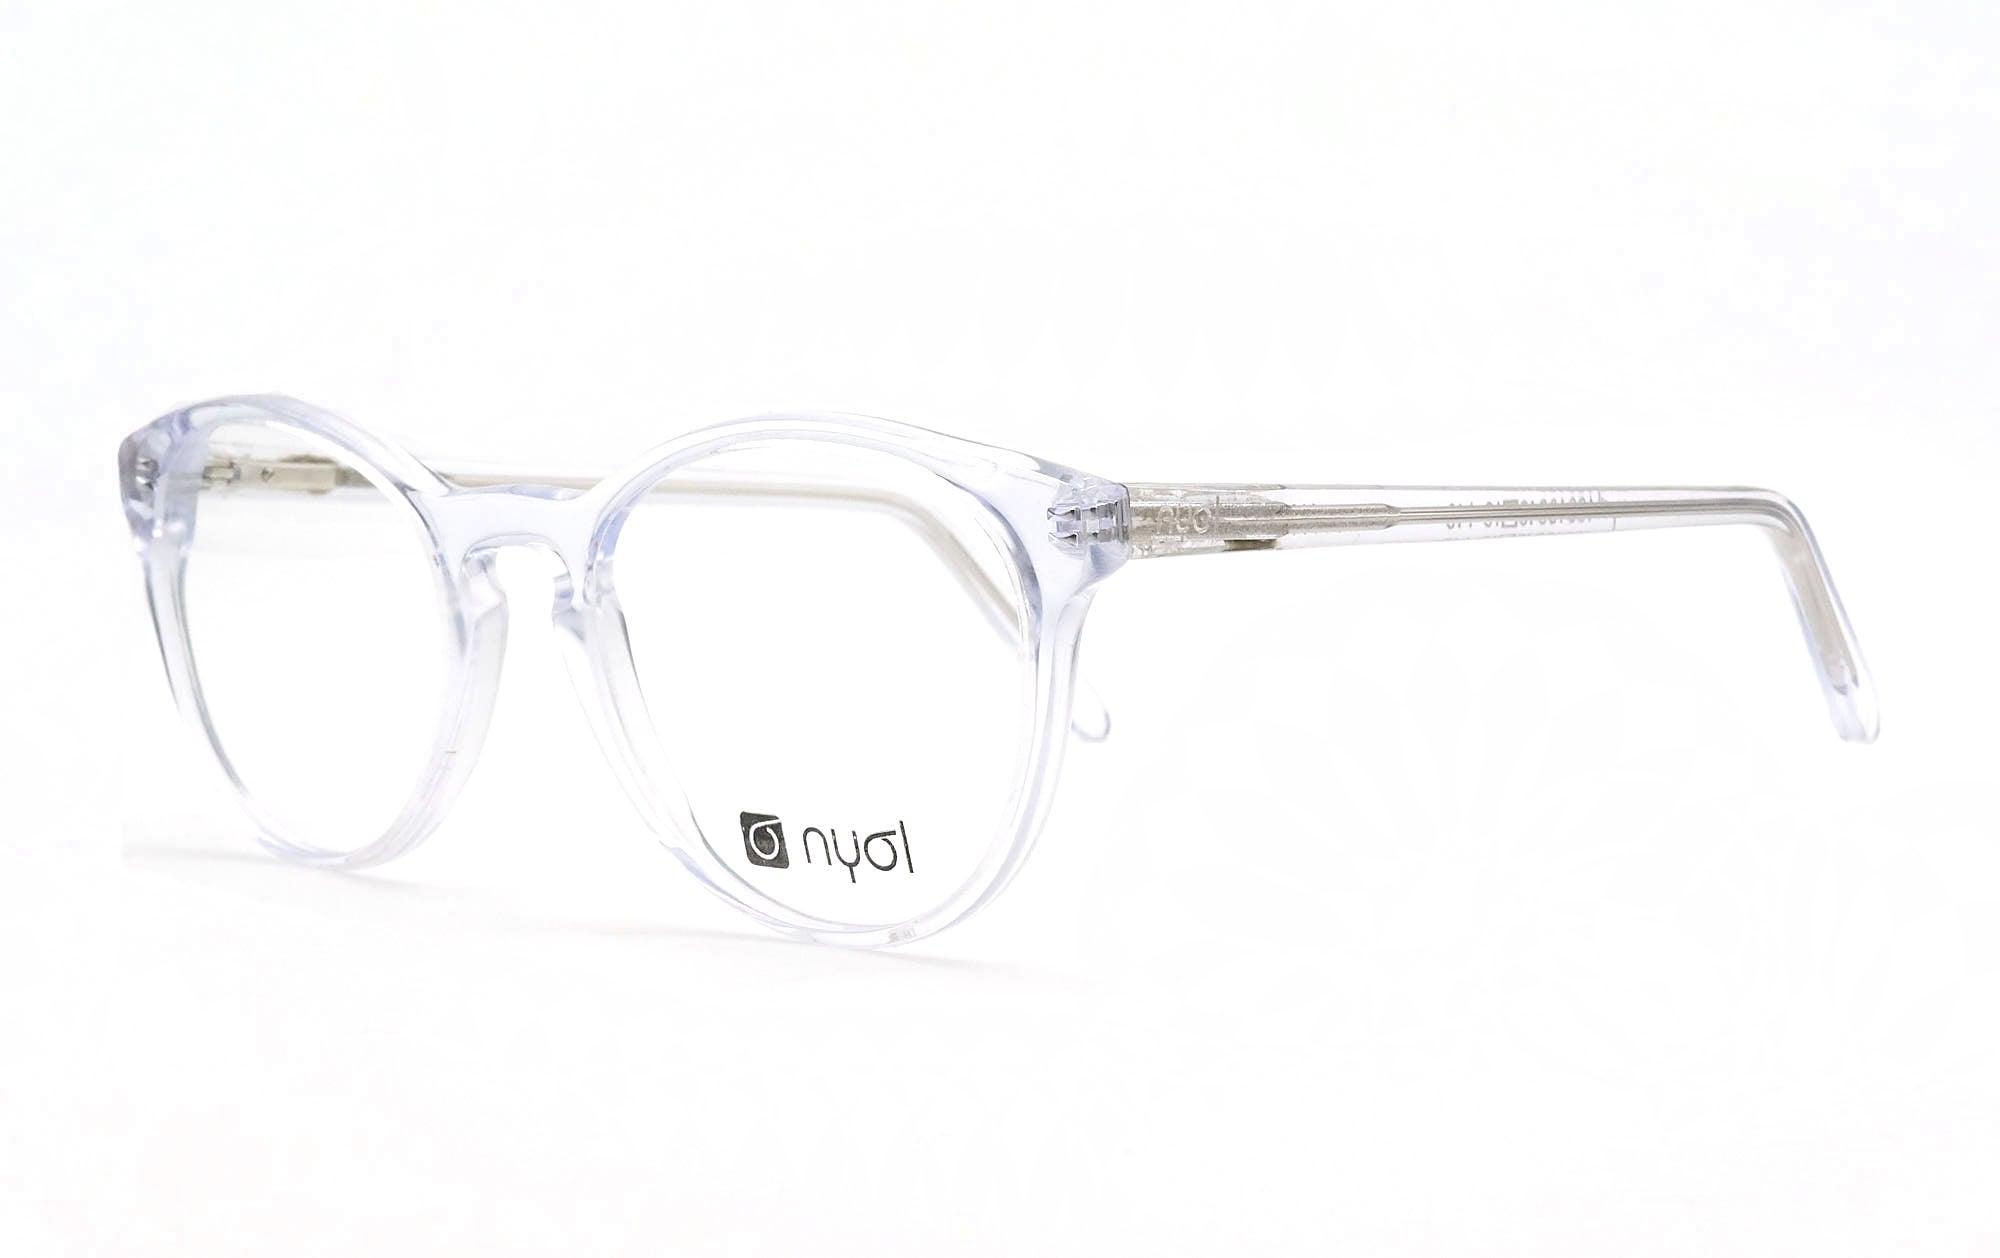 NYOL 1601 06 - Opticas Lookout